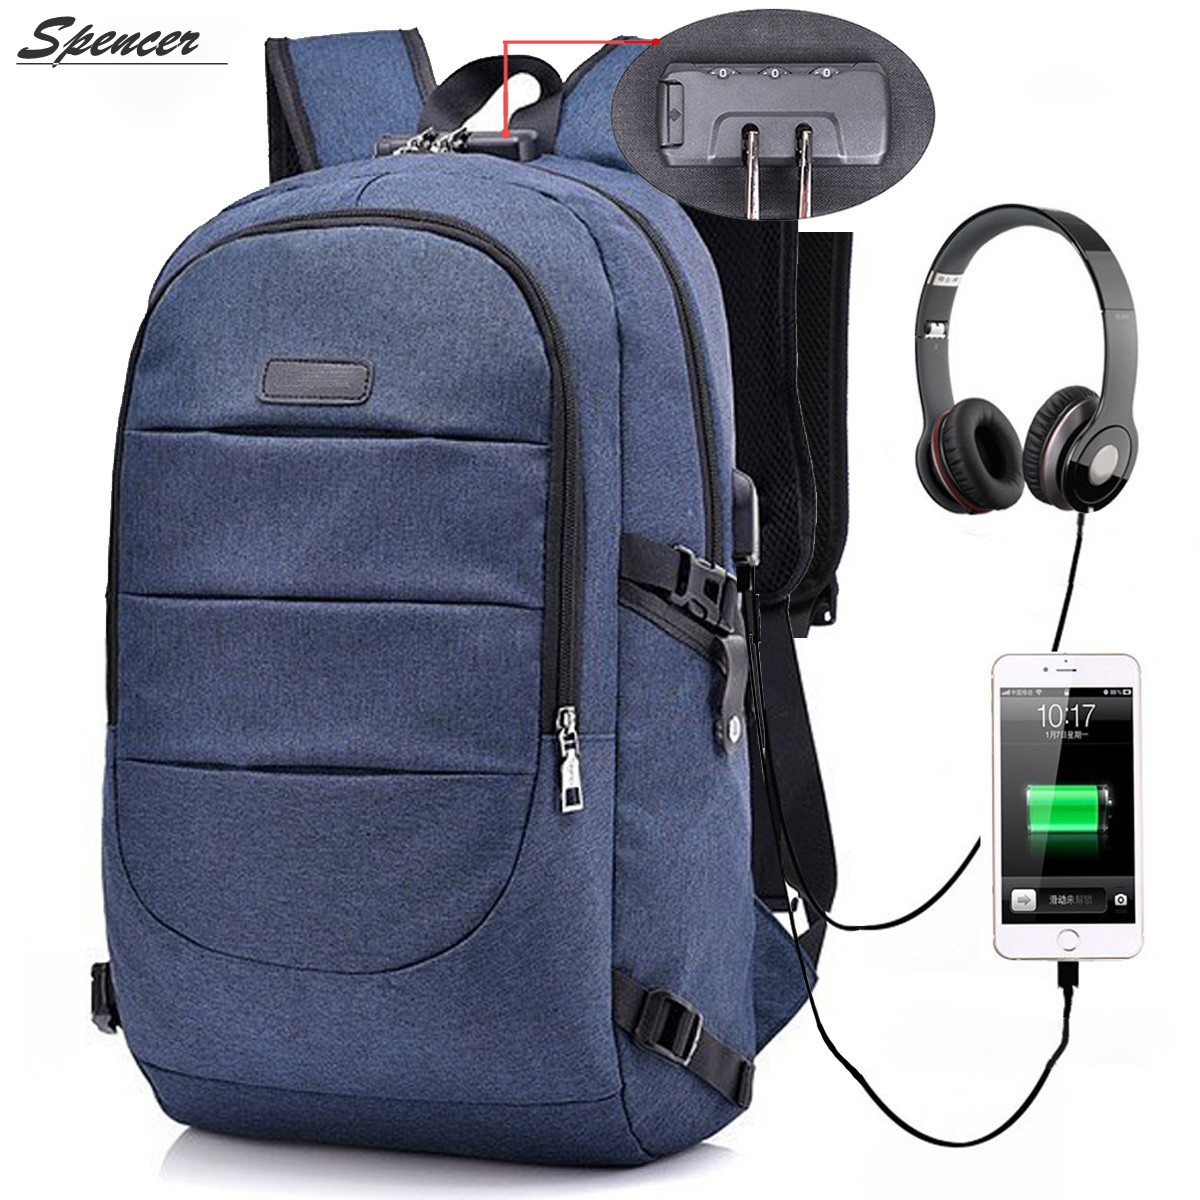 Spencer Laptop Backpack for Men & Women, Anti Theft with lock Water Resistant Business Backpack with USB Charging Port Fits UNDER 17" Laptop & Notebook (Blue) - image 2 of 9